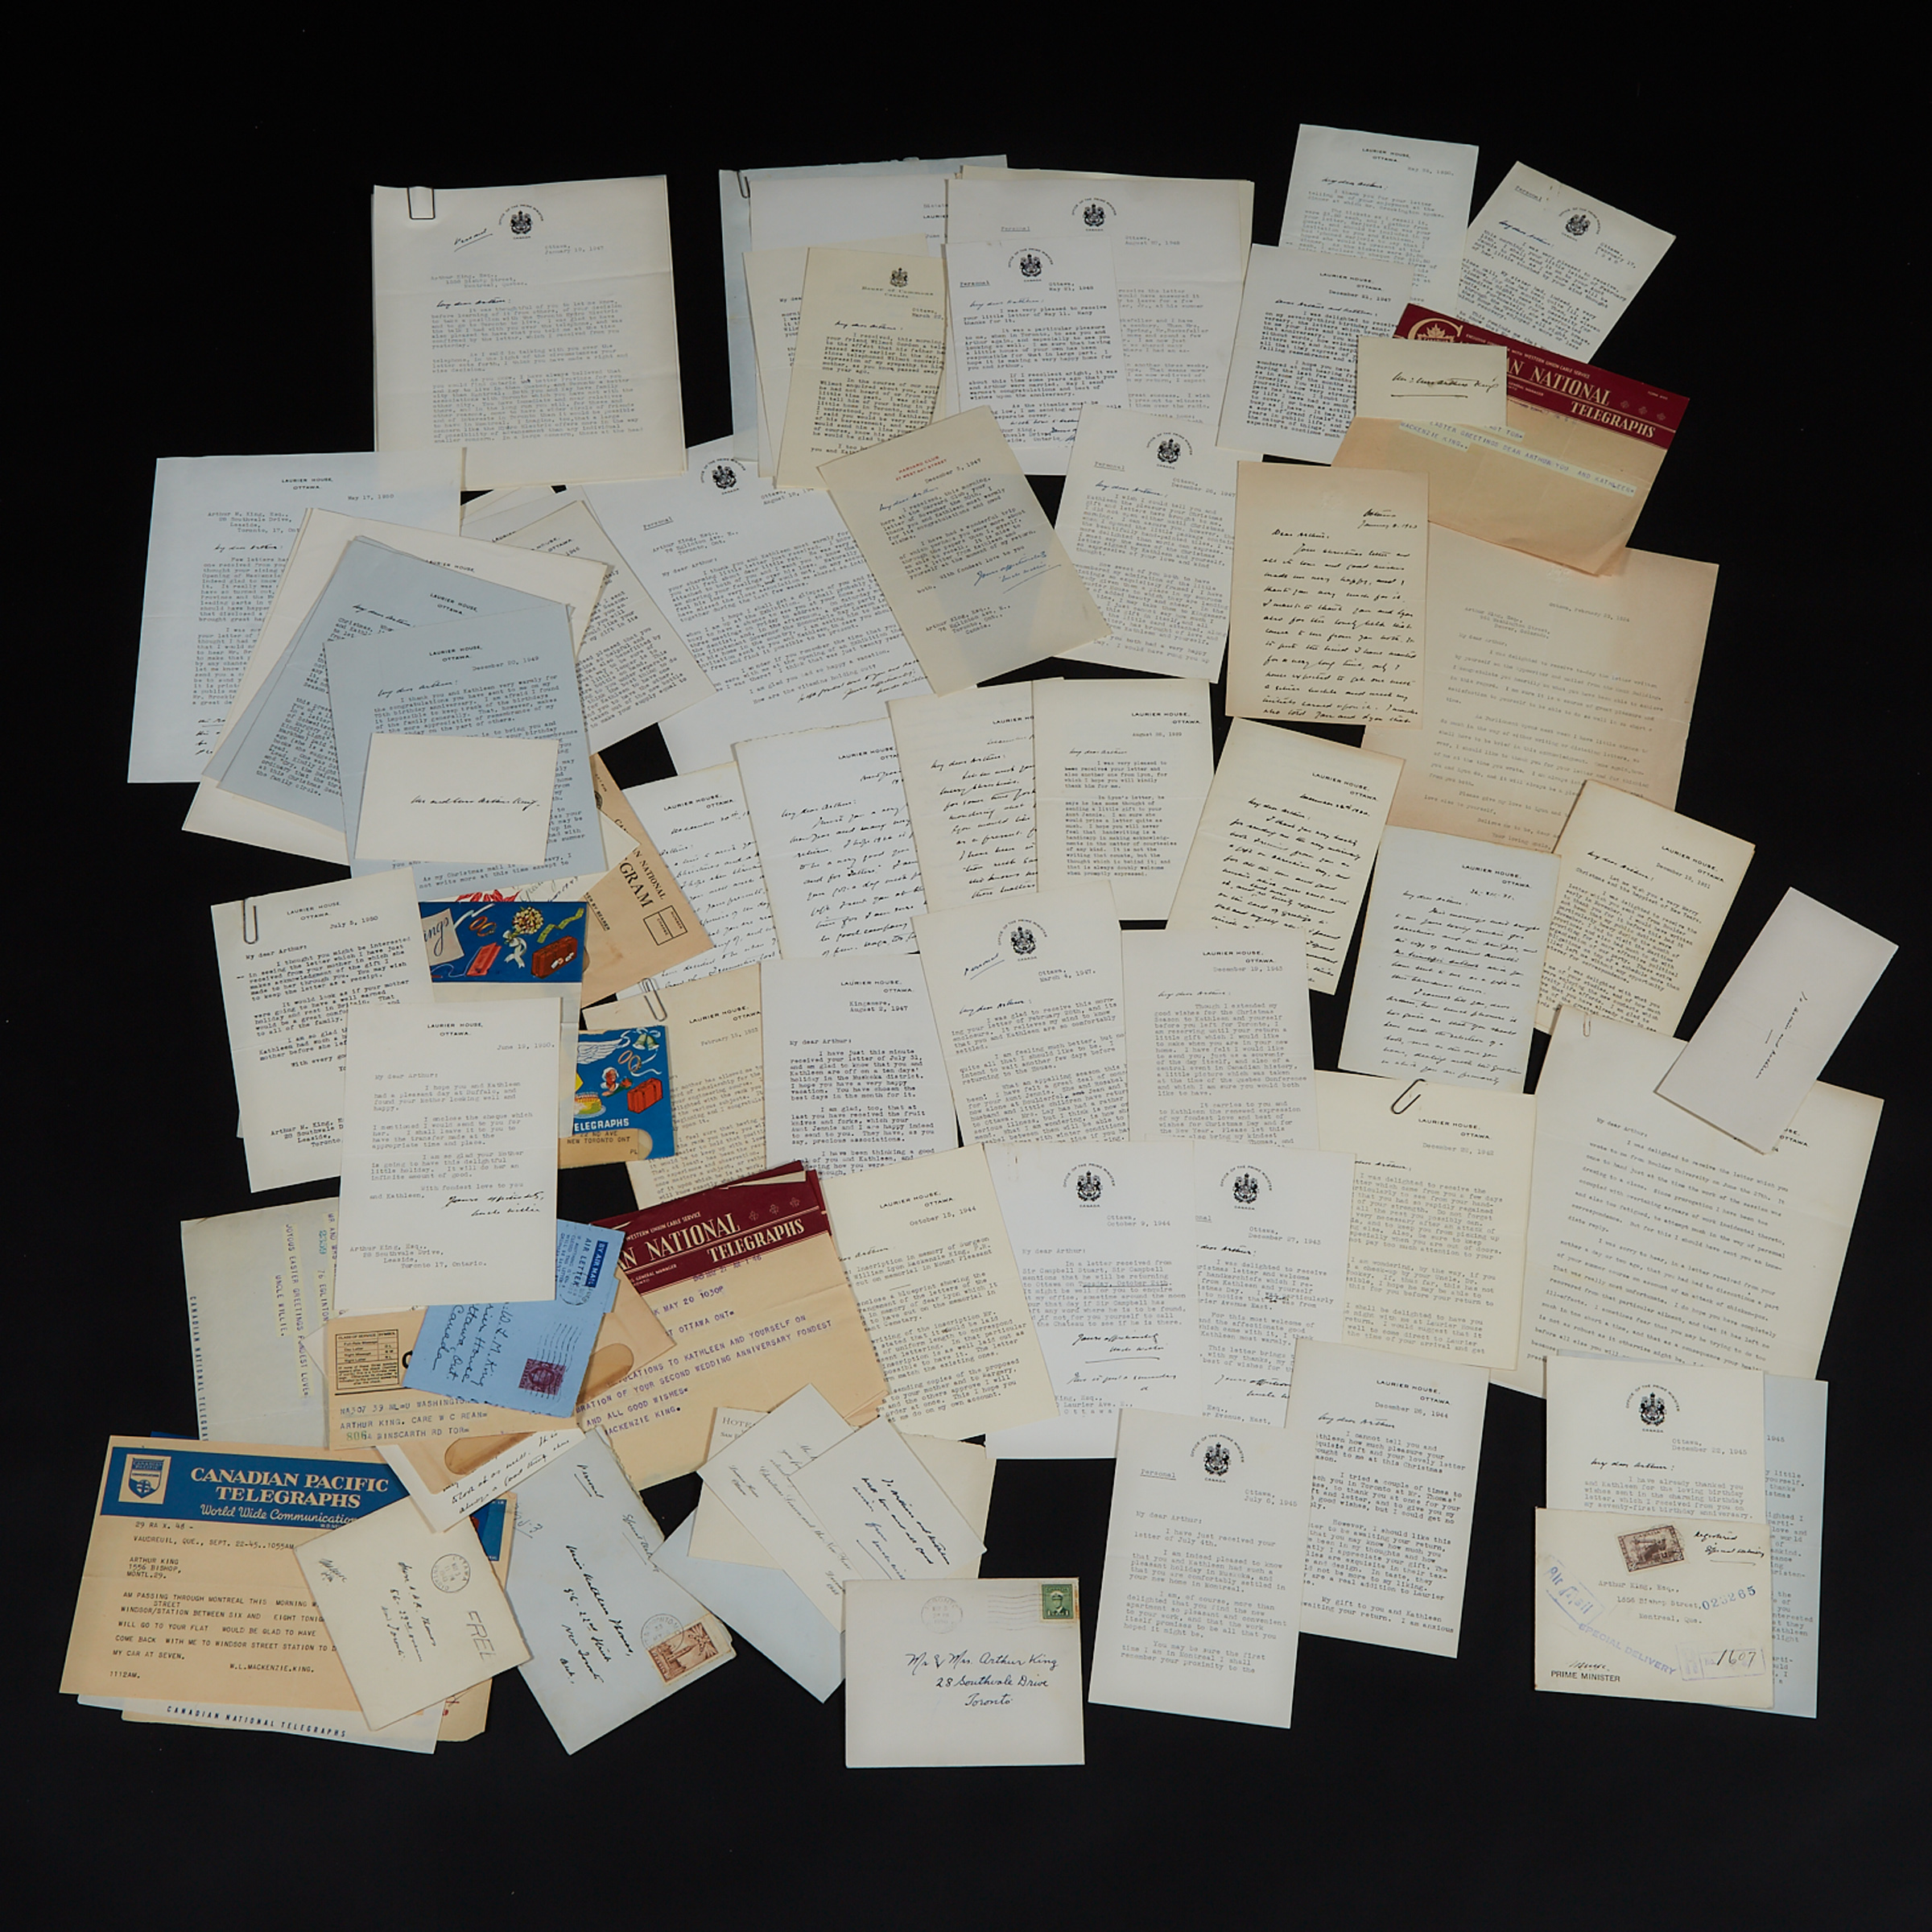 Extensive Archive of Material Relating to William Lyon Mackenzie King (1874-1950) and Family